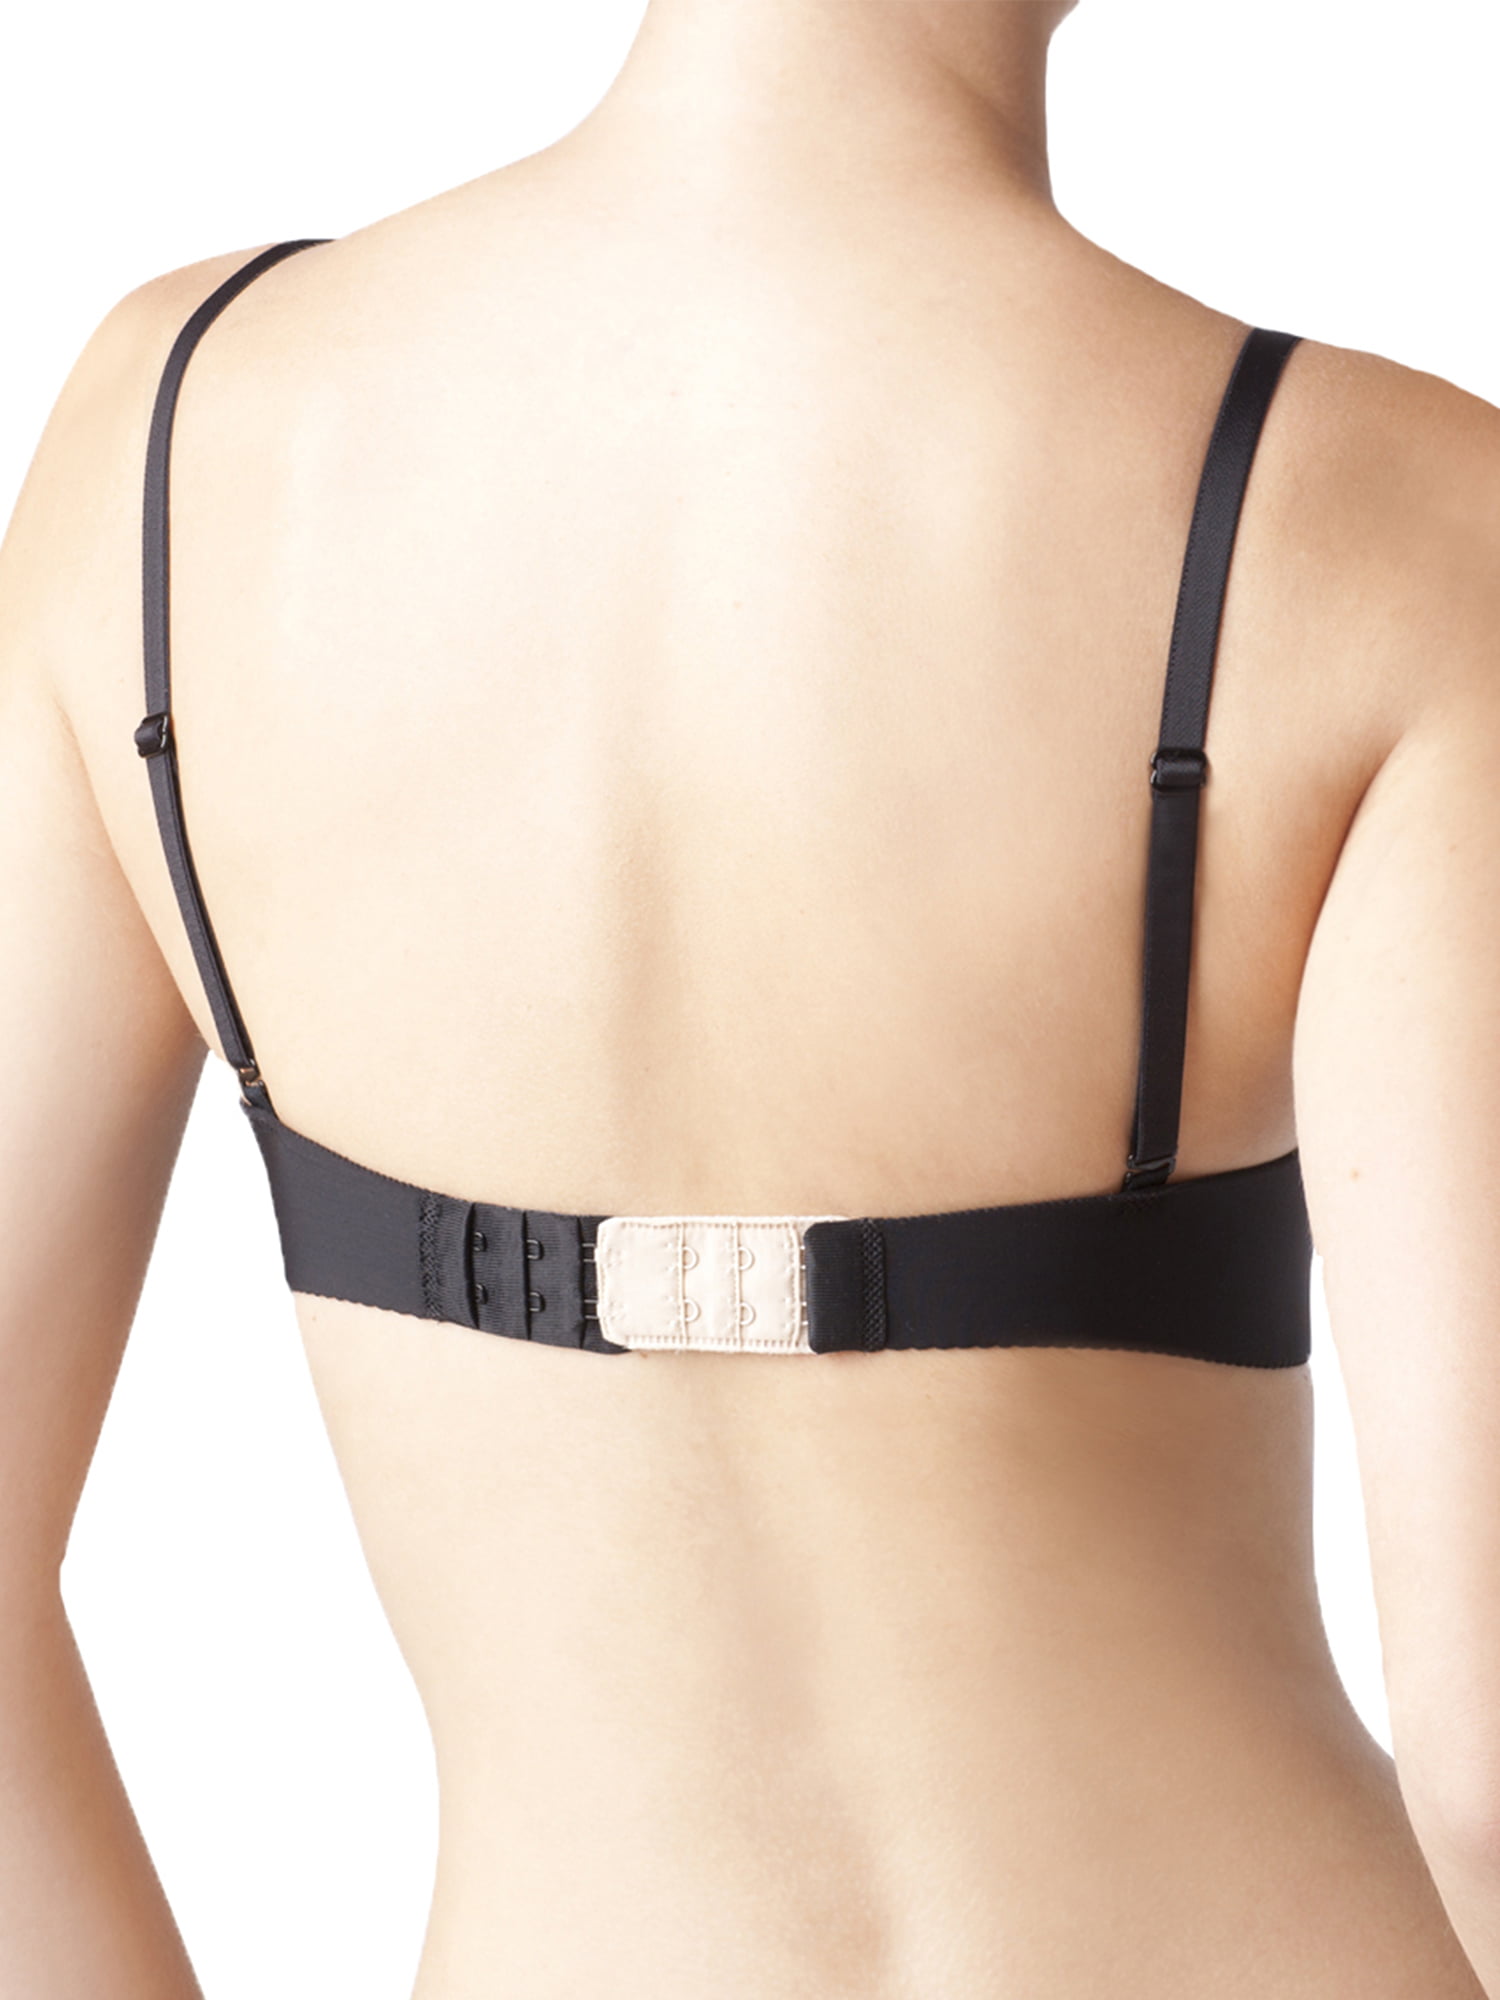 The Natural Womens 2-Hook Bra Extenders 3-Pack Style-4084M 